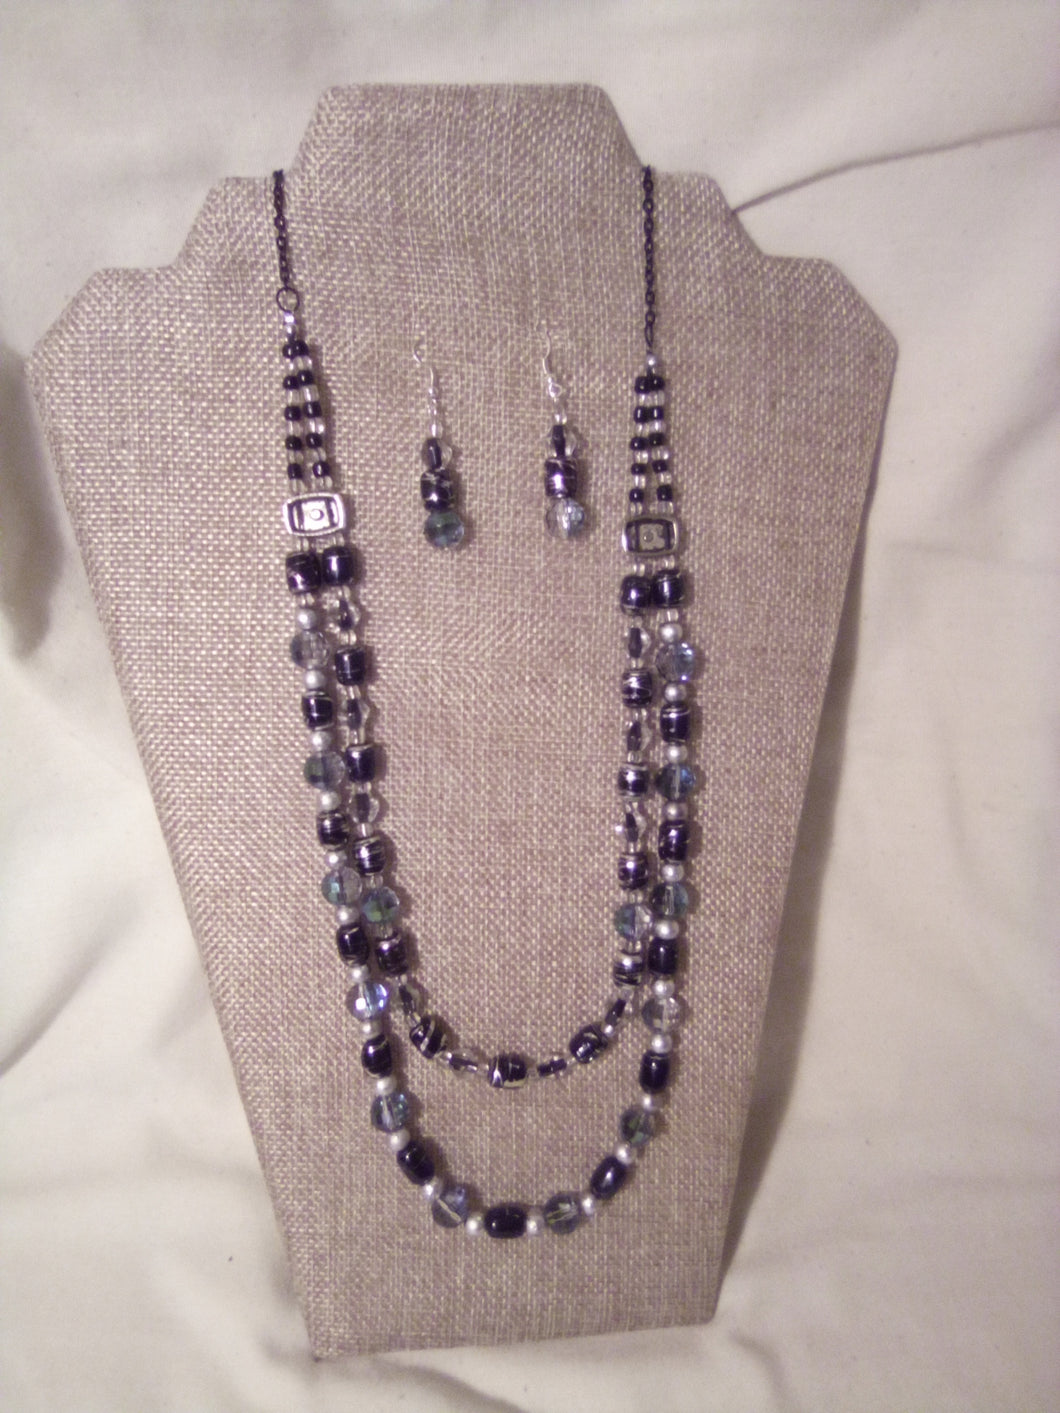 Black, silver and crystal bead necklace with matching earrings